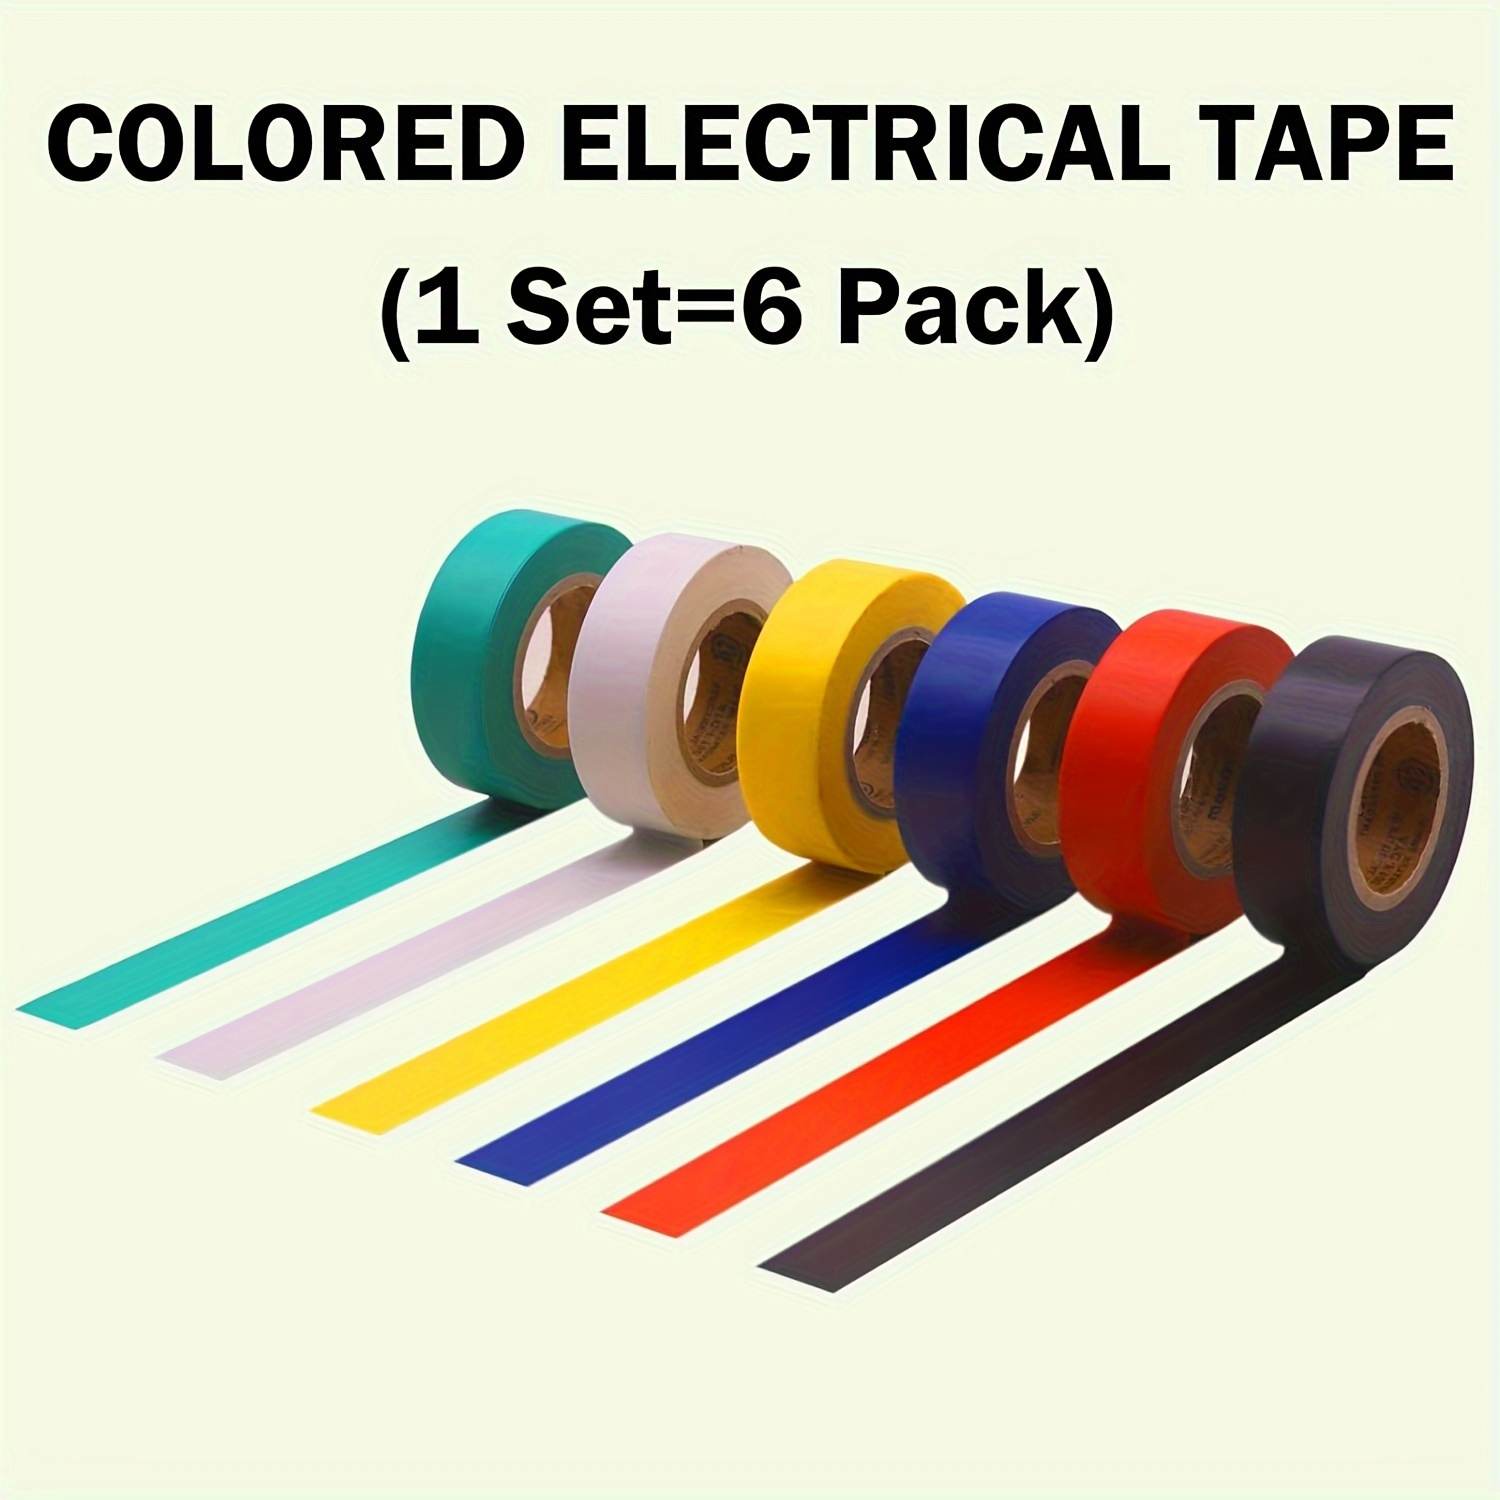 

6pcs Electrical Tape, Masking Tape Voltage Level 600v Dustproof, Colorful Adhesive For General Home Vehicle Auto Car Power Circuit Wiring, Lead-free Flame Retardant Electrical Tape For Commercial Use